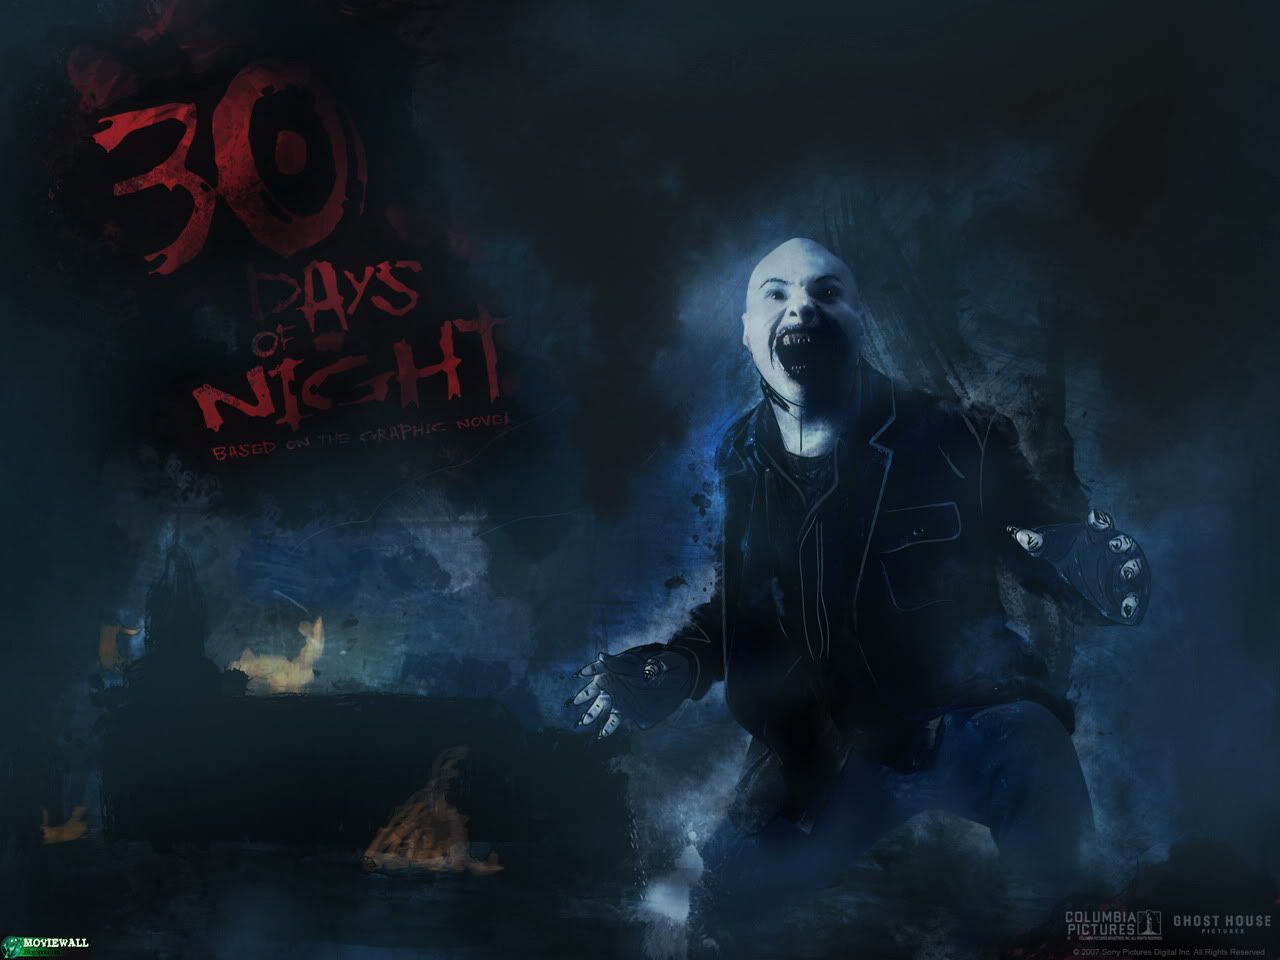 Moviewall - Movie Posters, Wallpapers & Trailers.: 30 Days of Night.